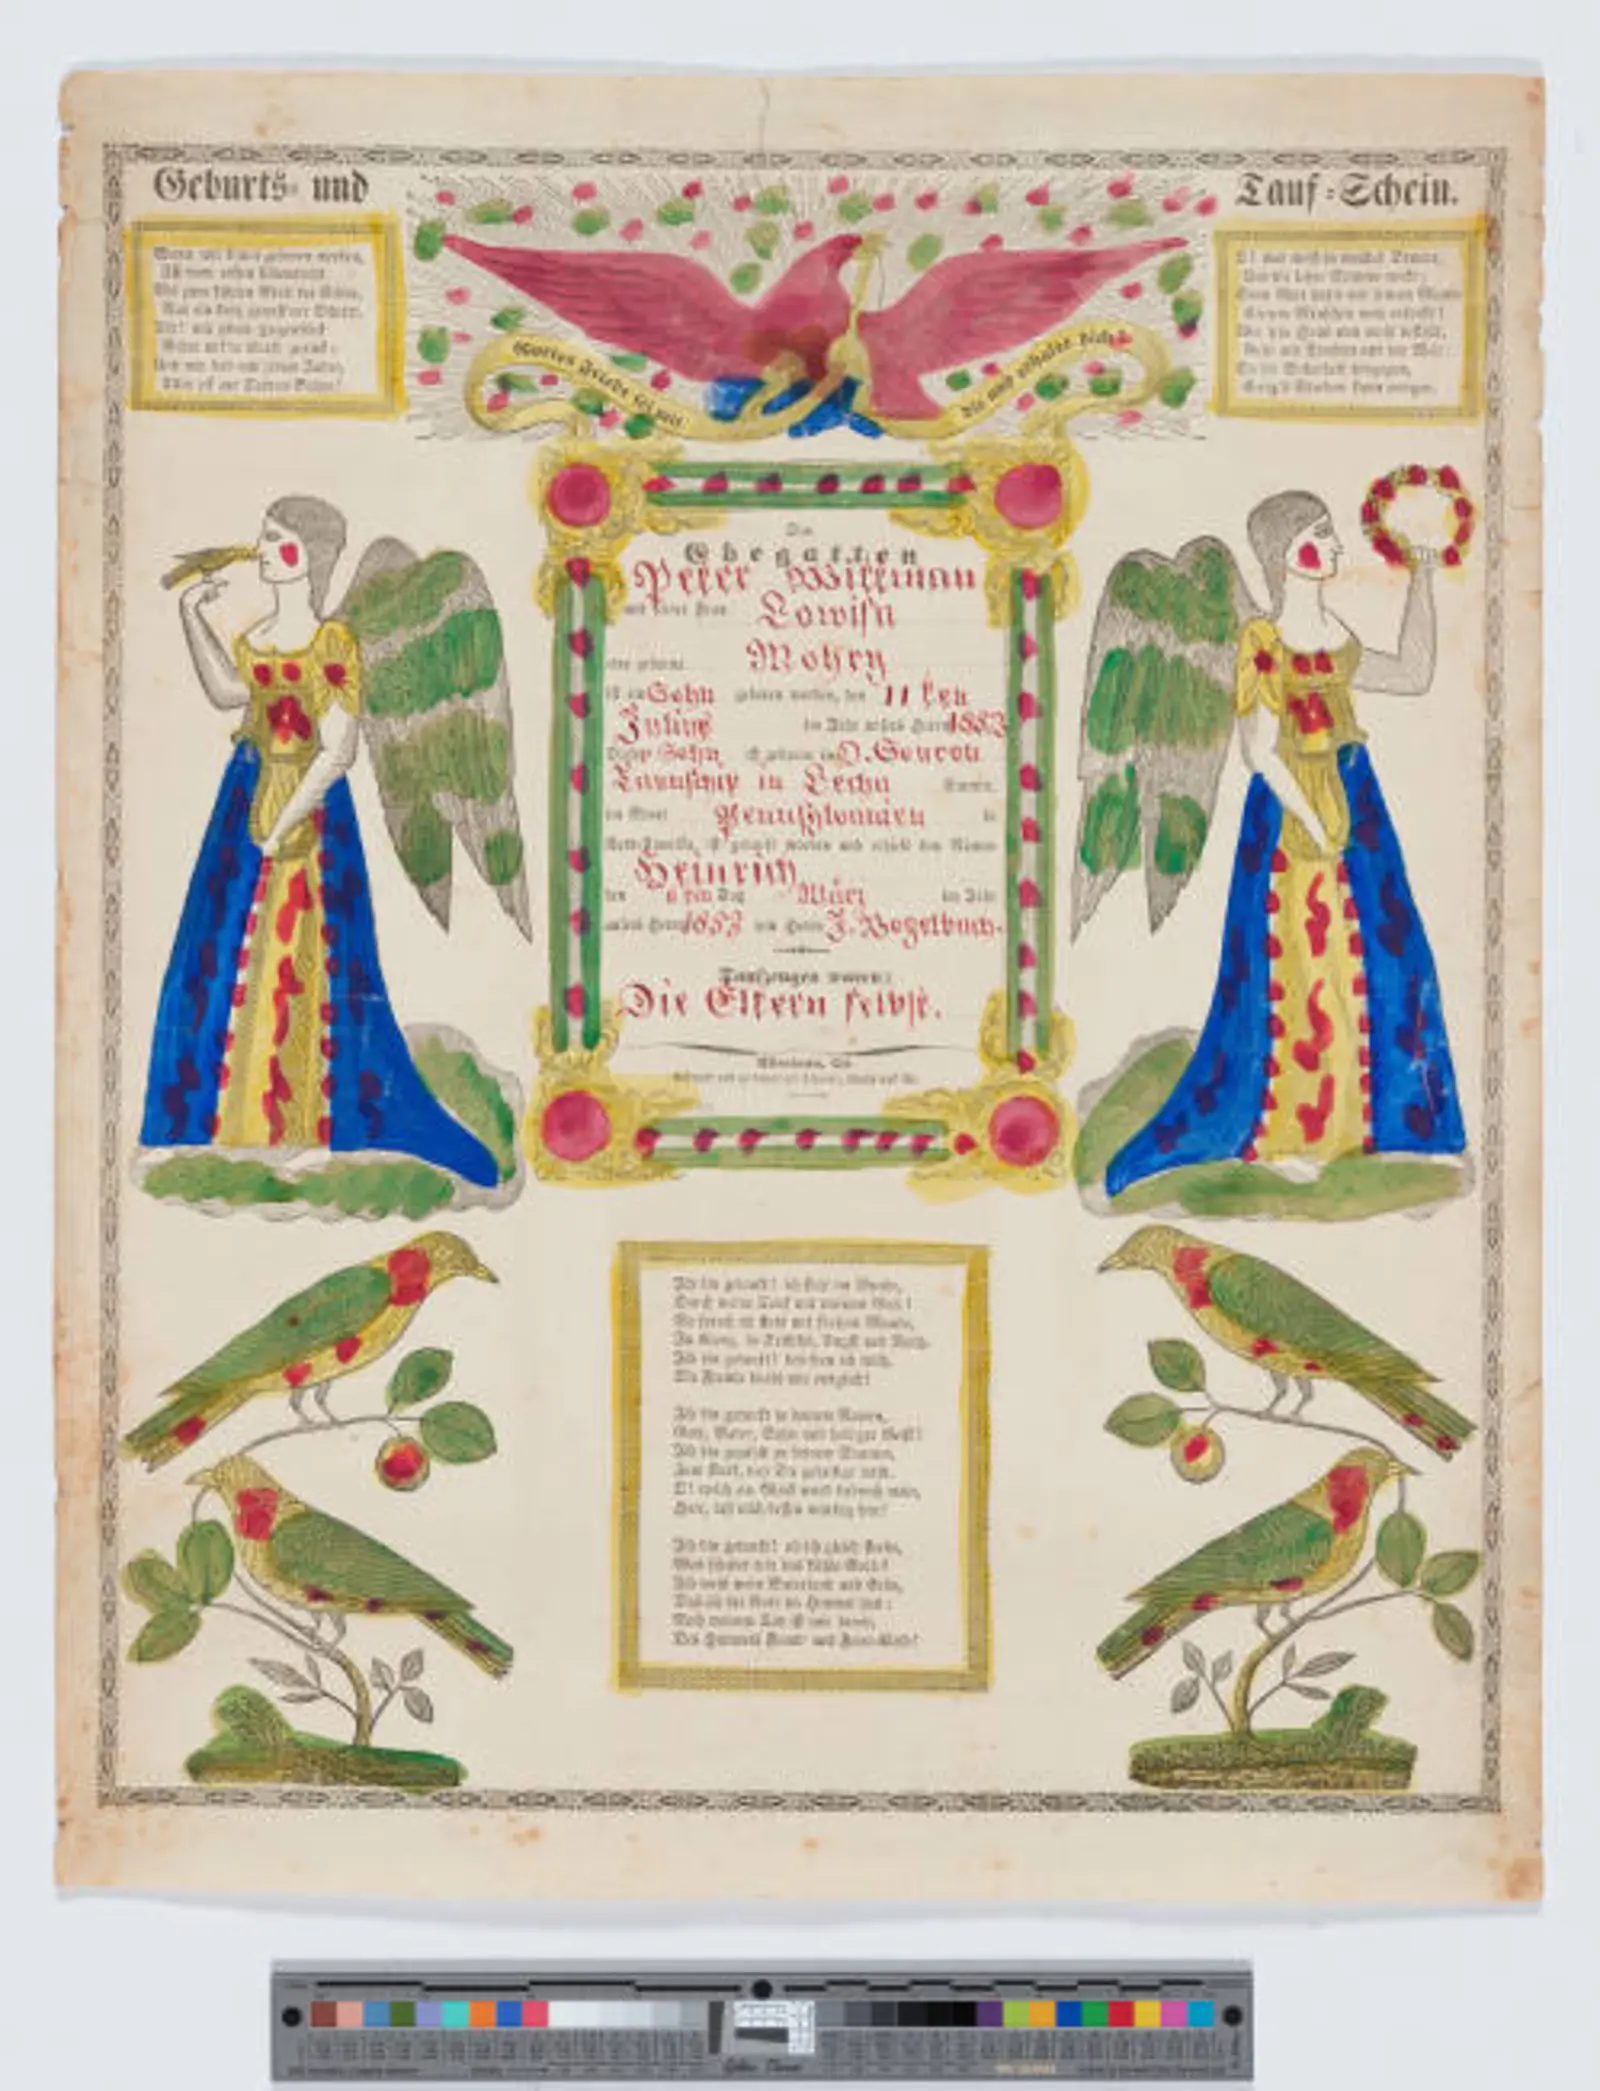 Image of a birth and baptism certificate with angels, birds, and an American eagle.